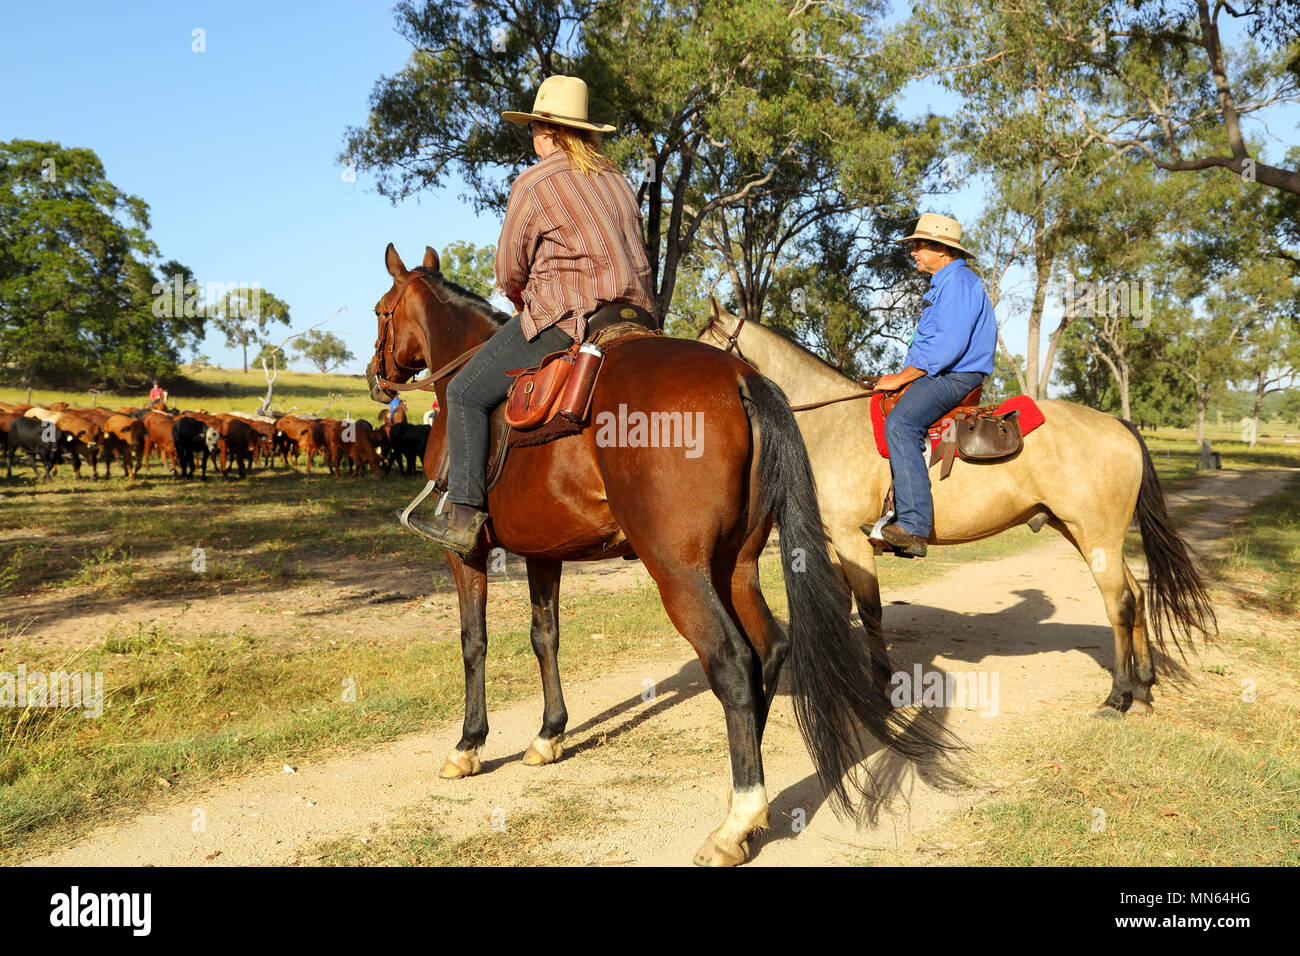 Caucasian man and women mustering cattle on horses. Stock Photo